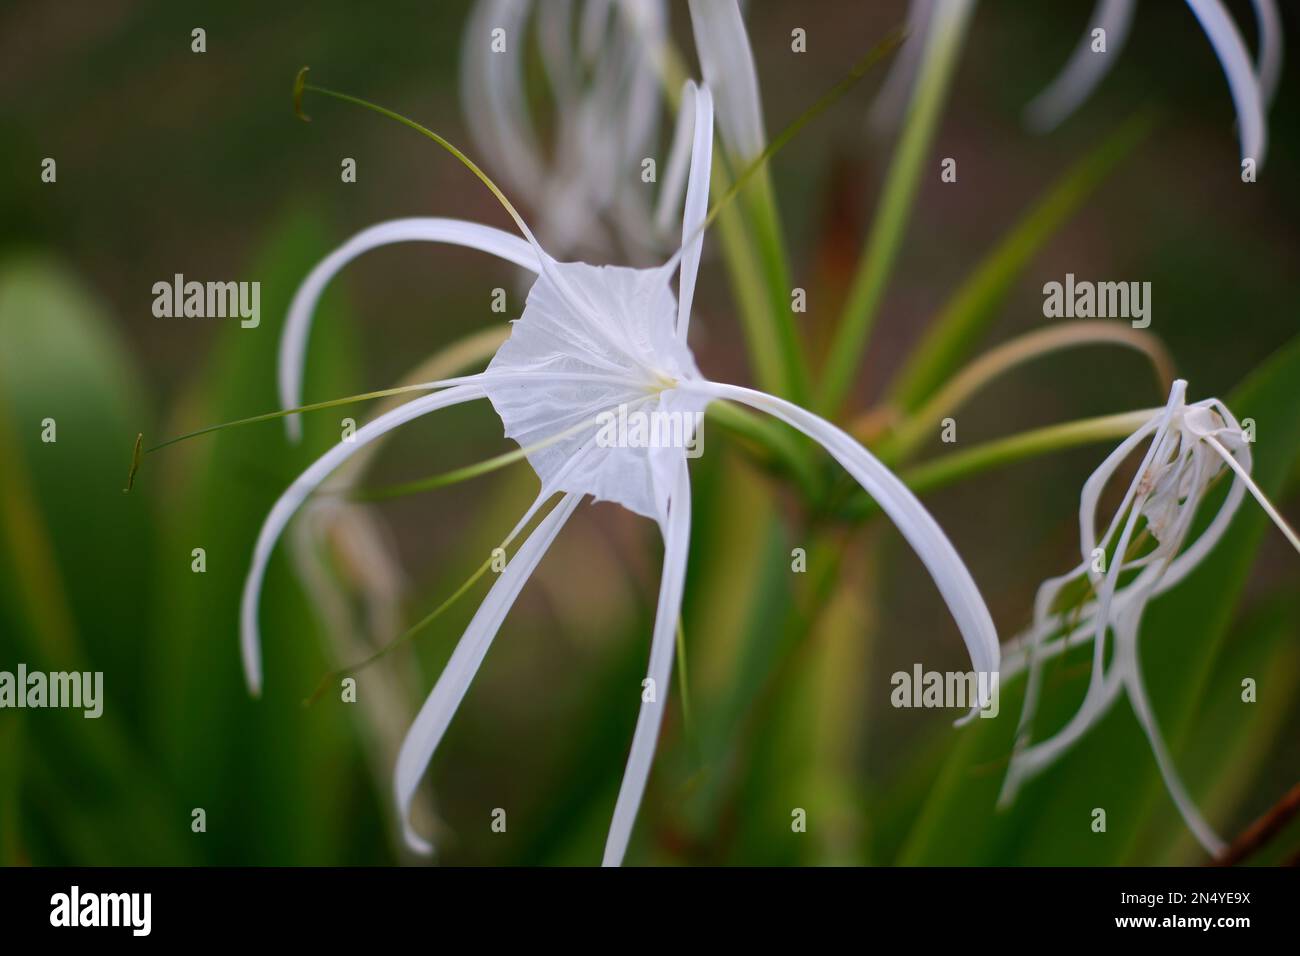 Beautiful White Flowers Of Hymenocallis Littoralis, A Type Of Fountain Lily, In The Village Of Daya Baru In The Afternoon Stock Photo